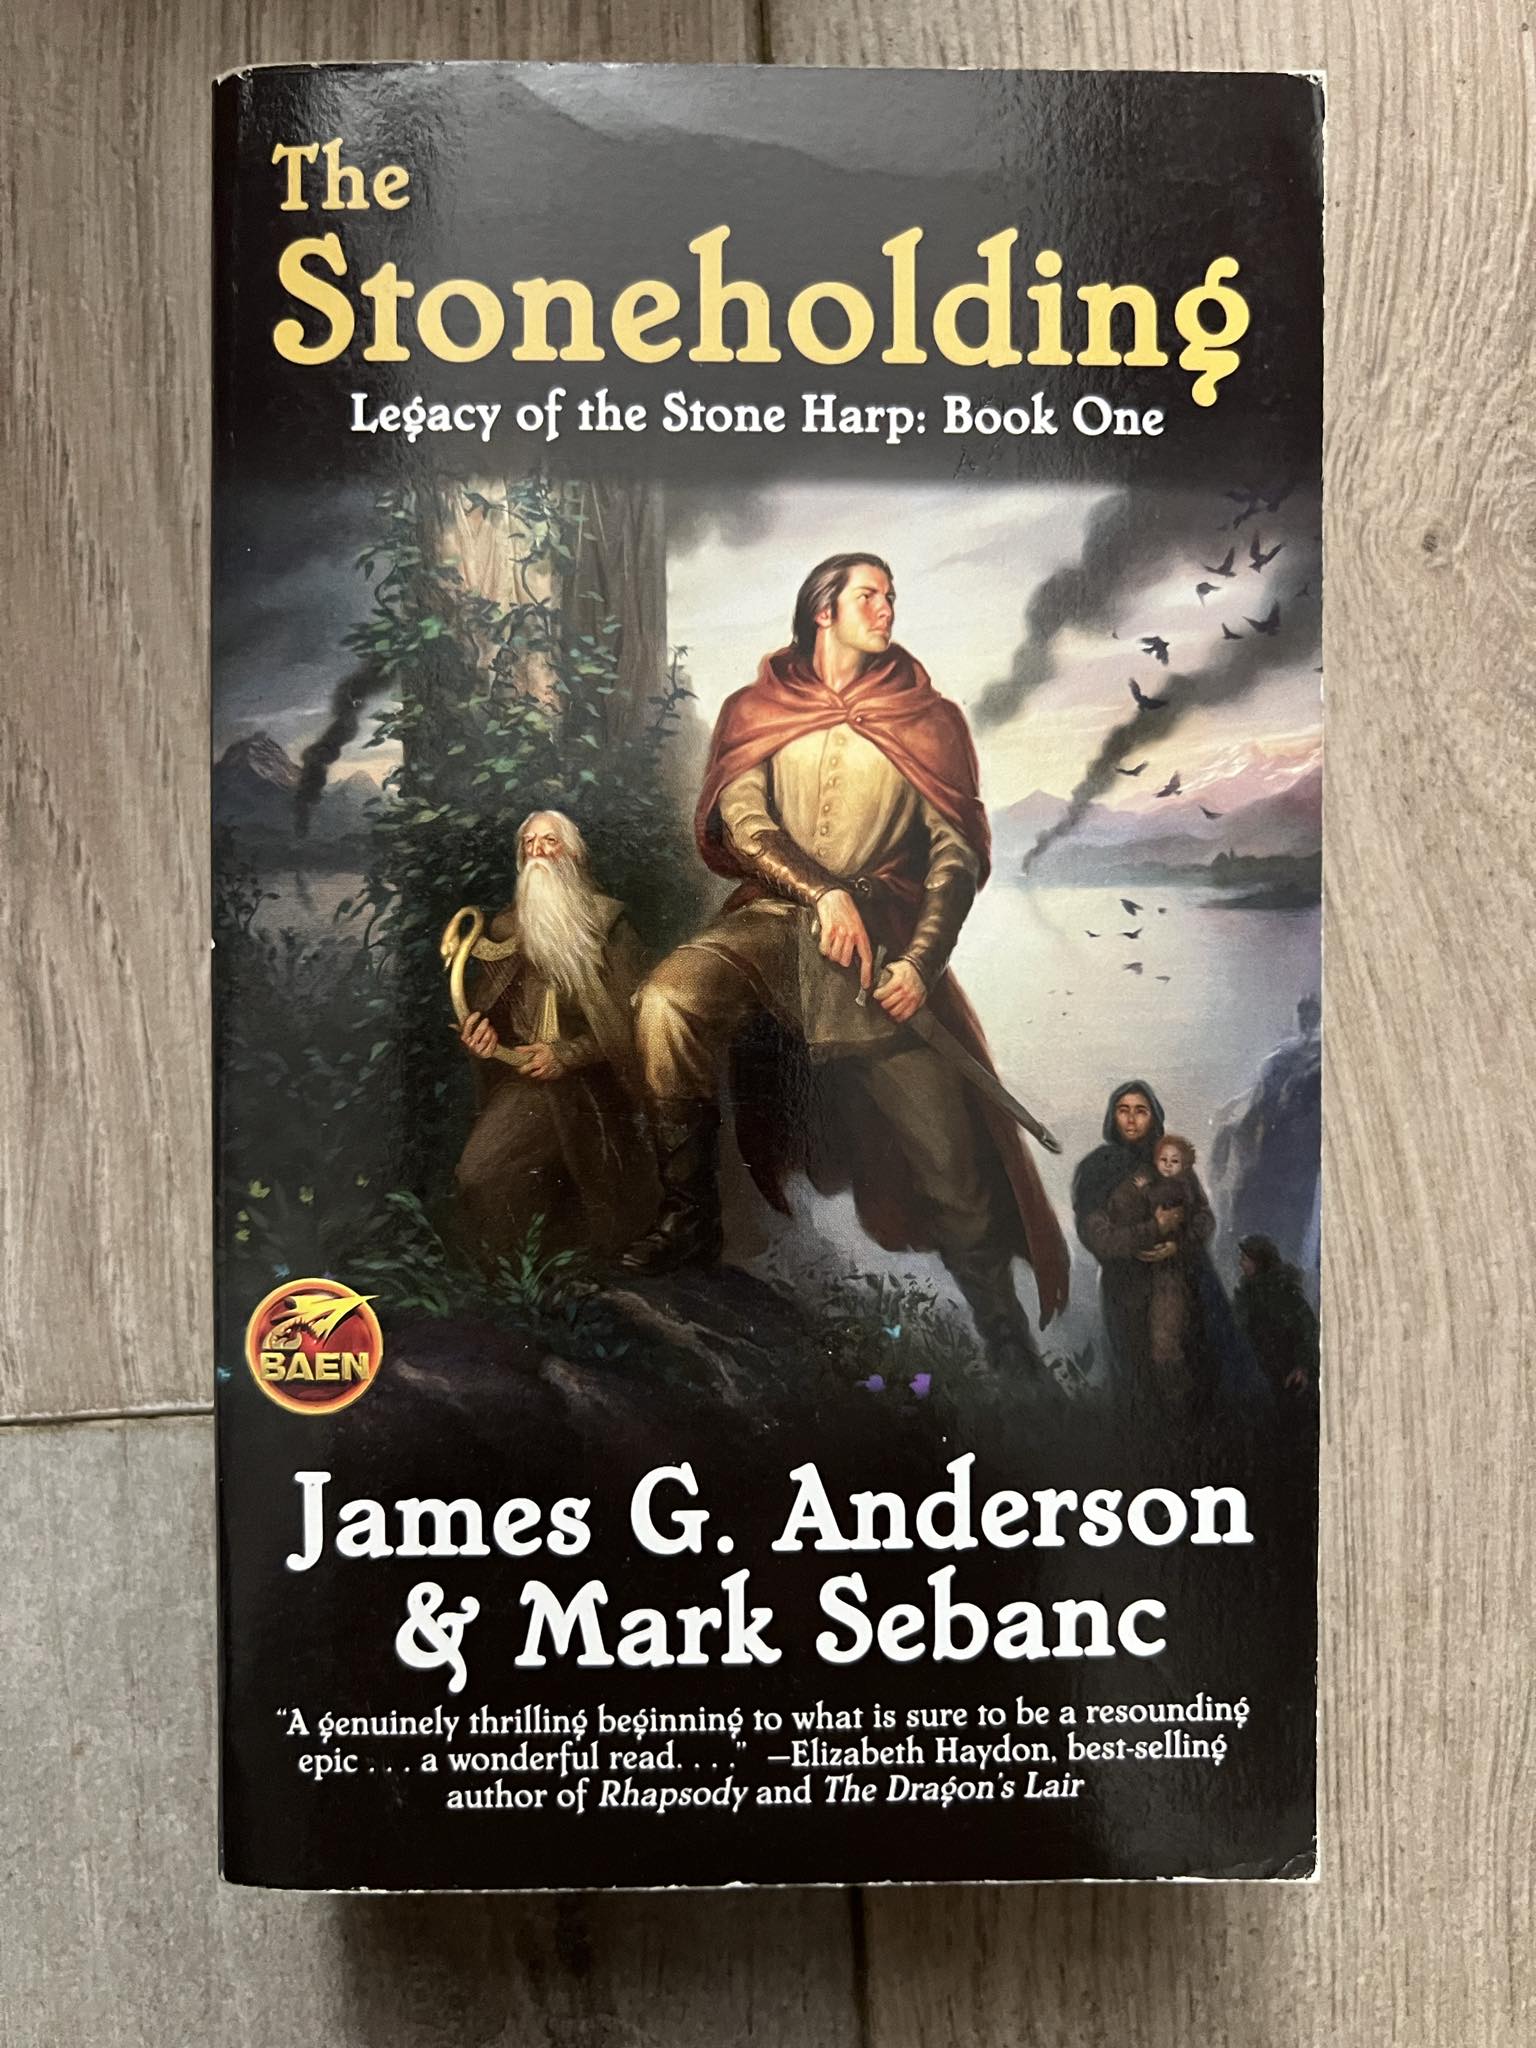 The Stoneholding - Legacy of the Stone Harp